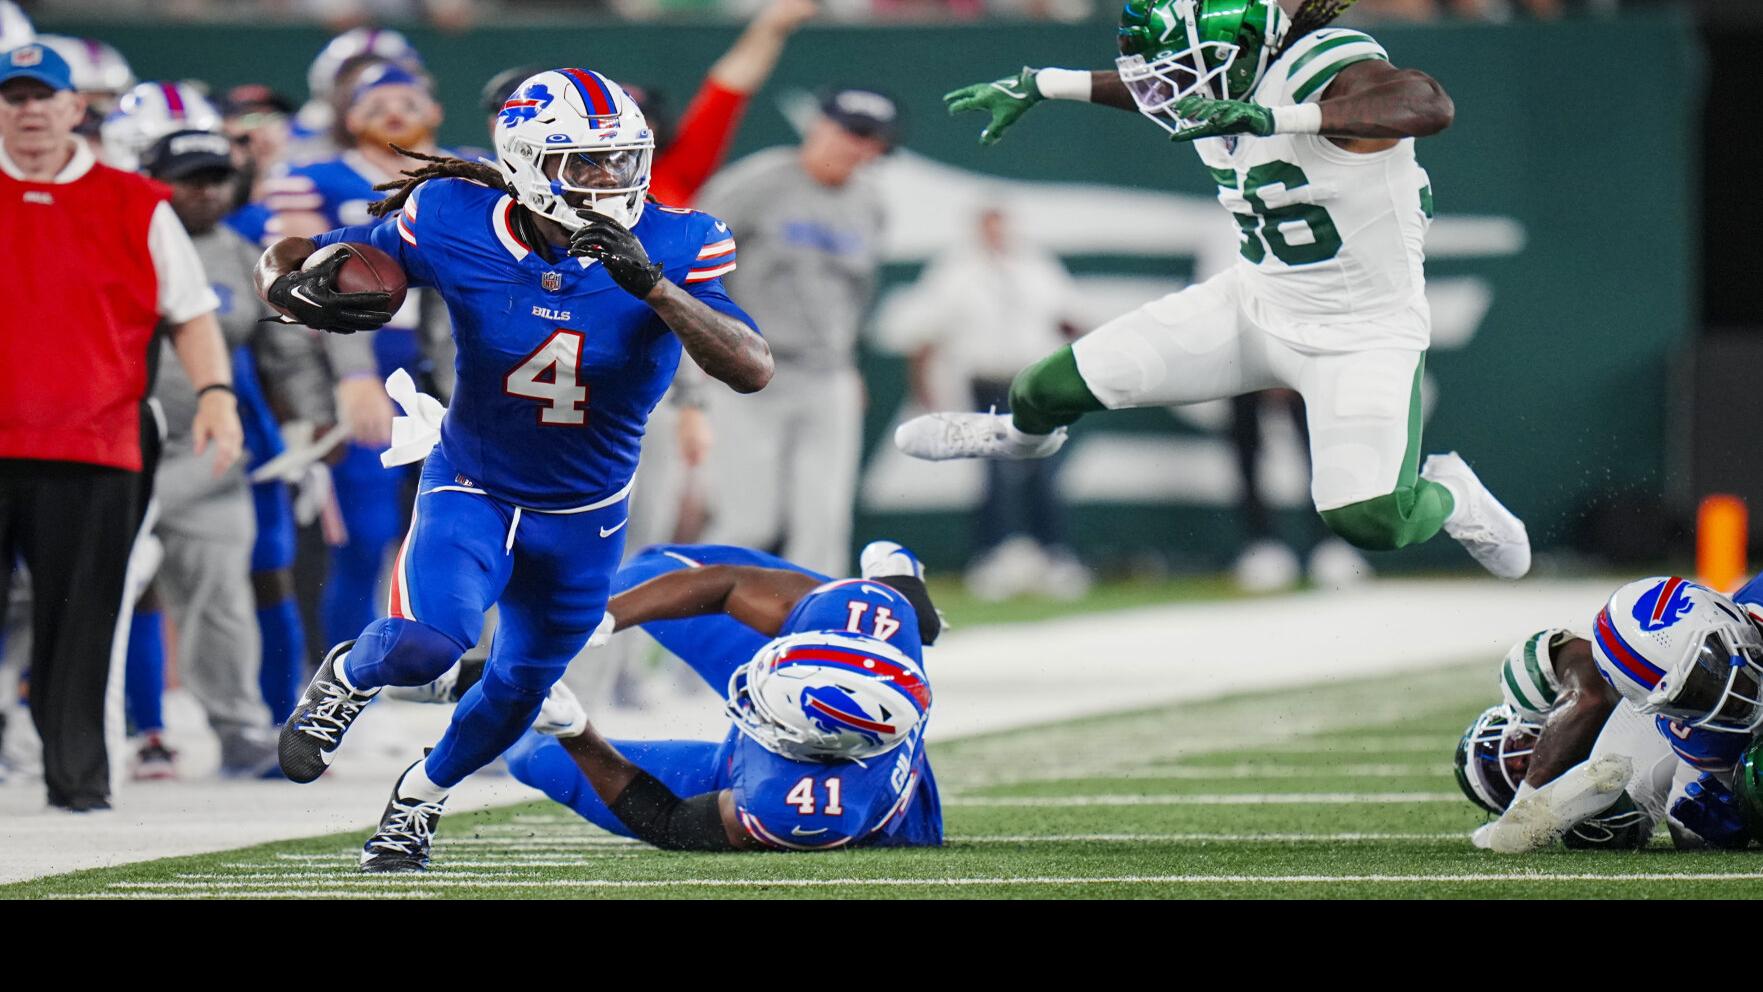 Patience on first down critical for Bills' offensive efficiency